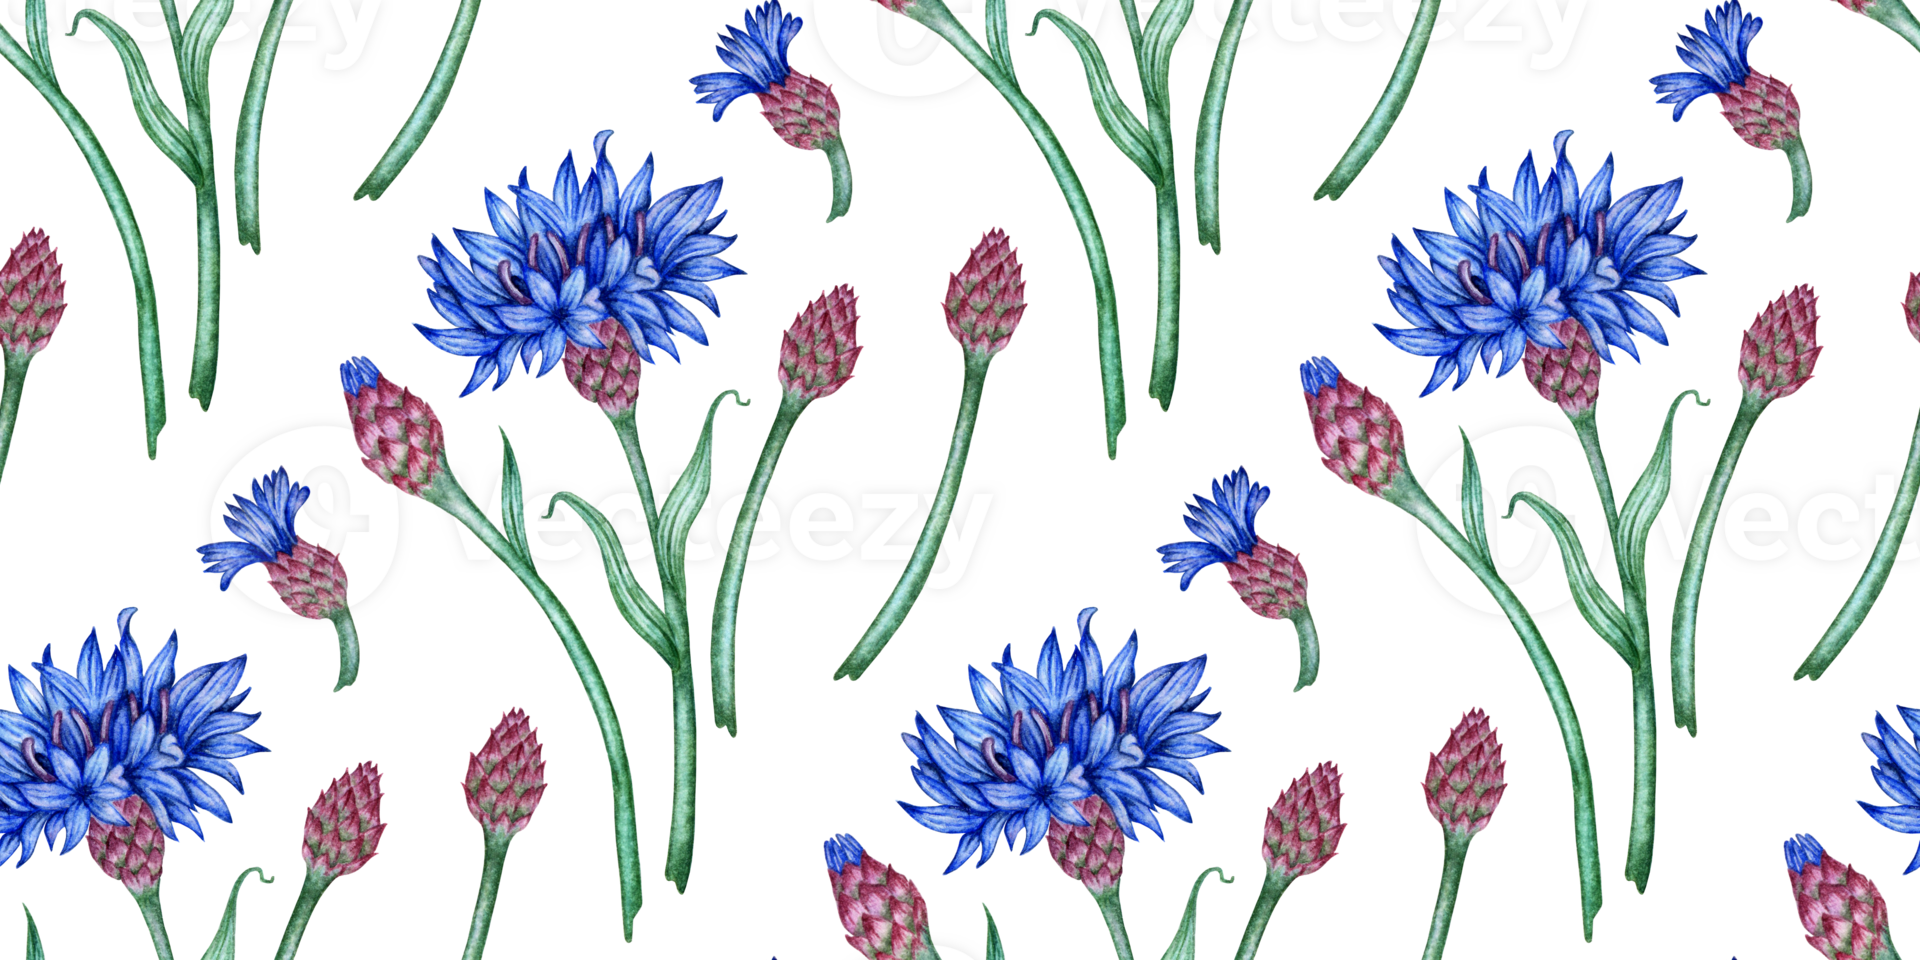 Cornflowers blue flowers pattern watercolor illustration. Botanical composition element isolated from background. Suitable for cosmetics, aromatherapy, medicine, treatment, care, design, png